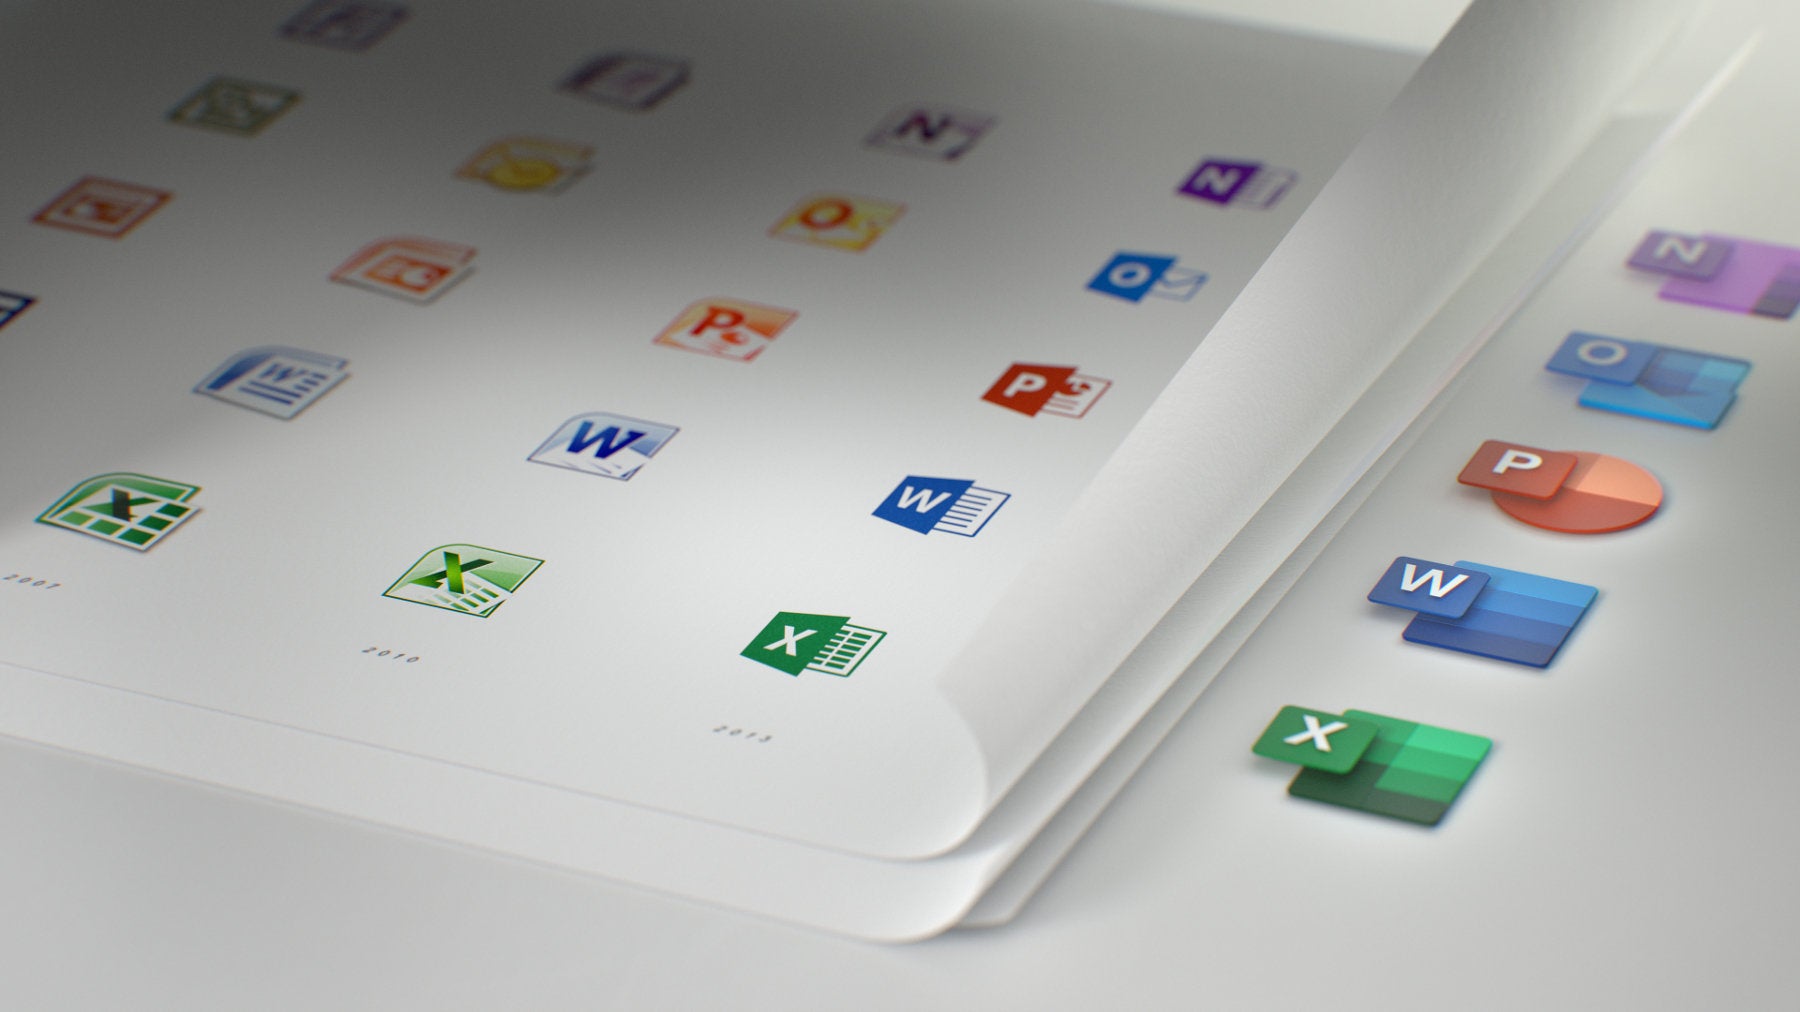 Microsoft reveals major redesign of Office App icons, here is what they look like